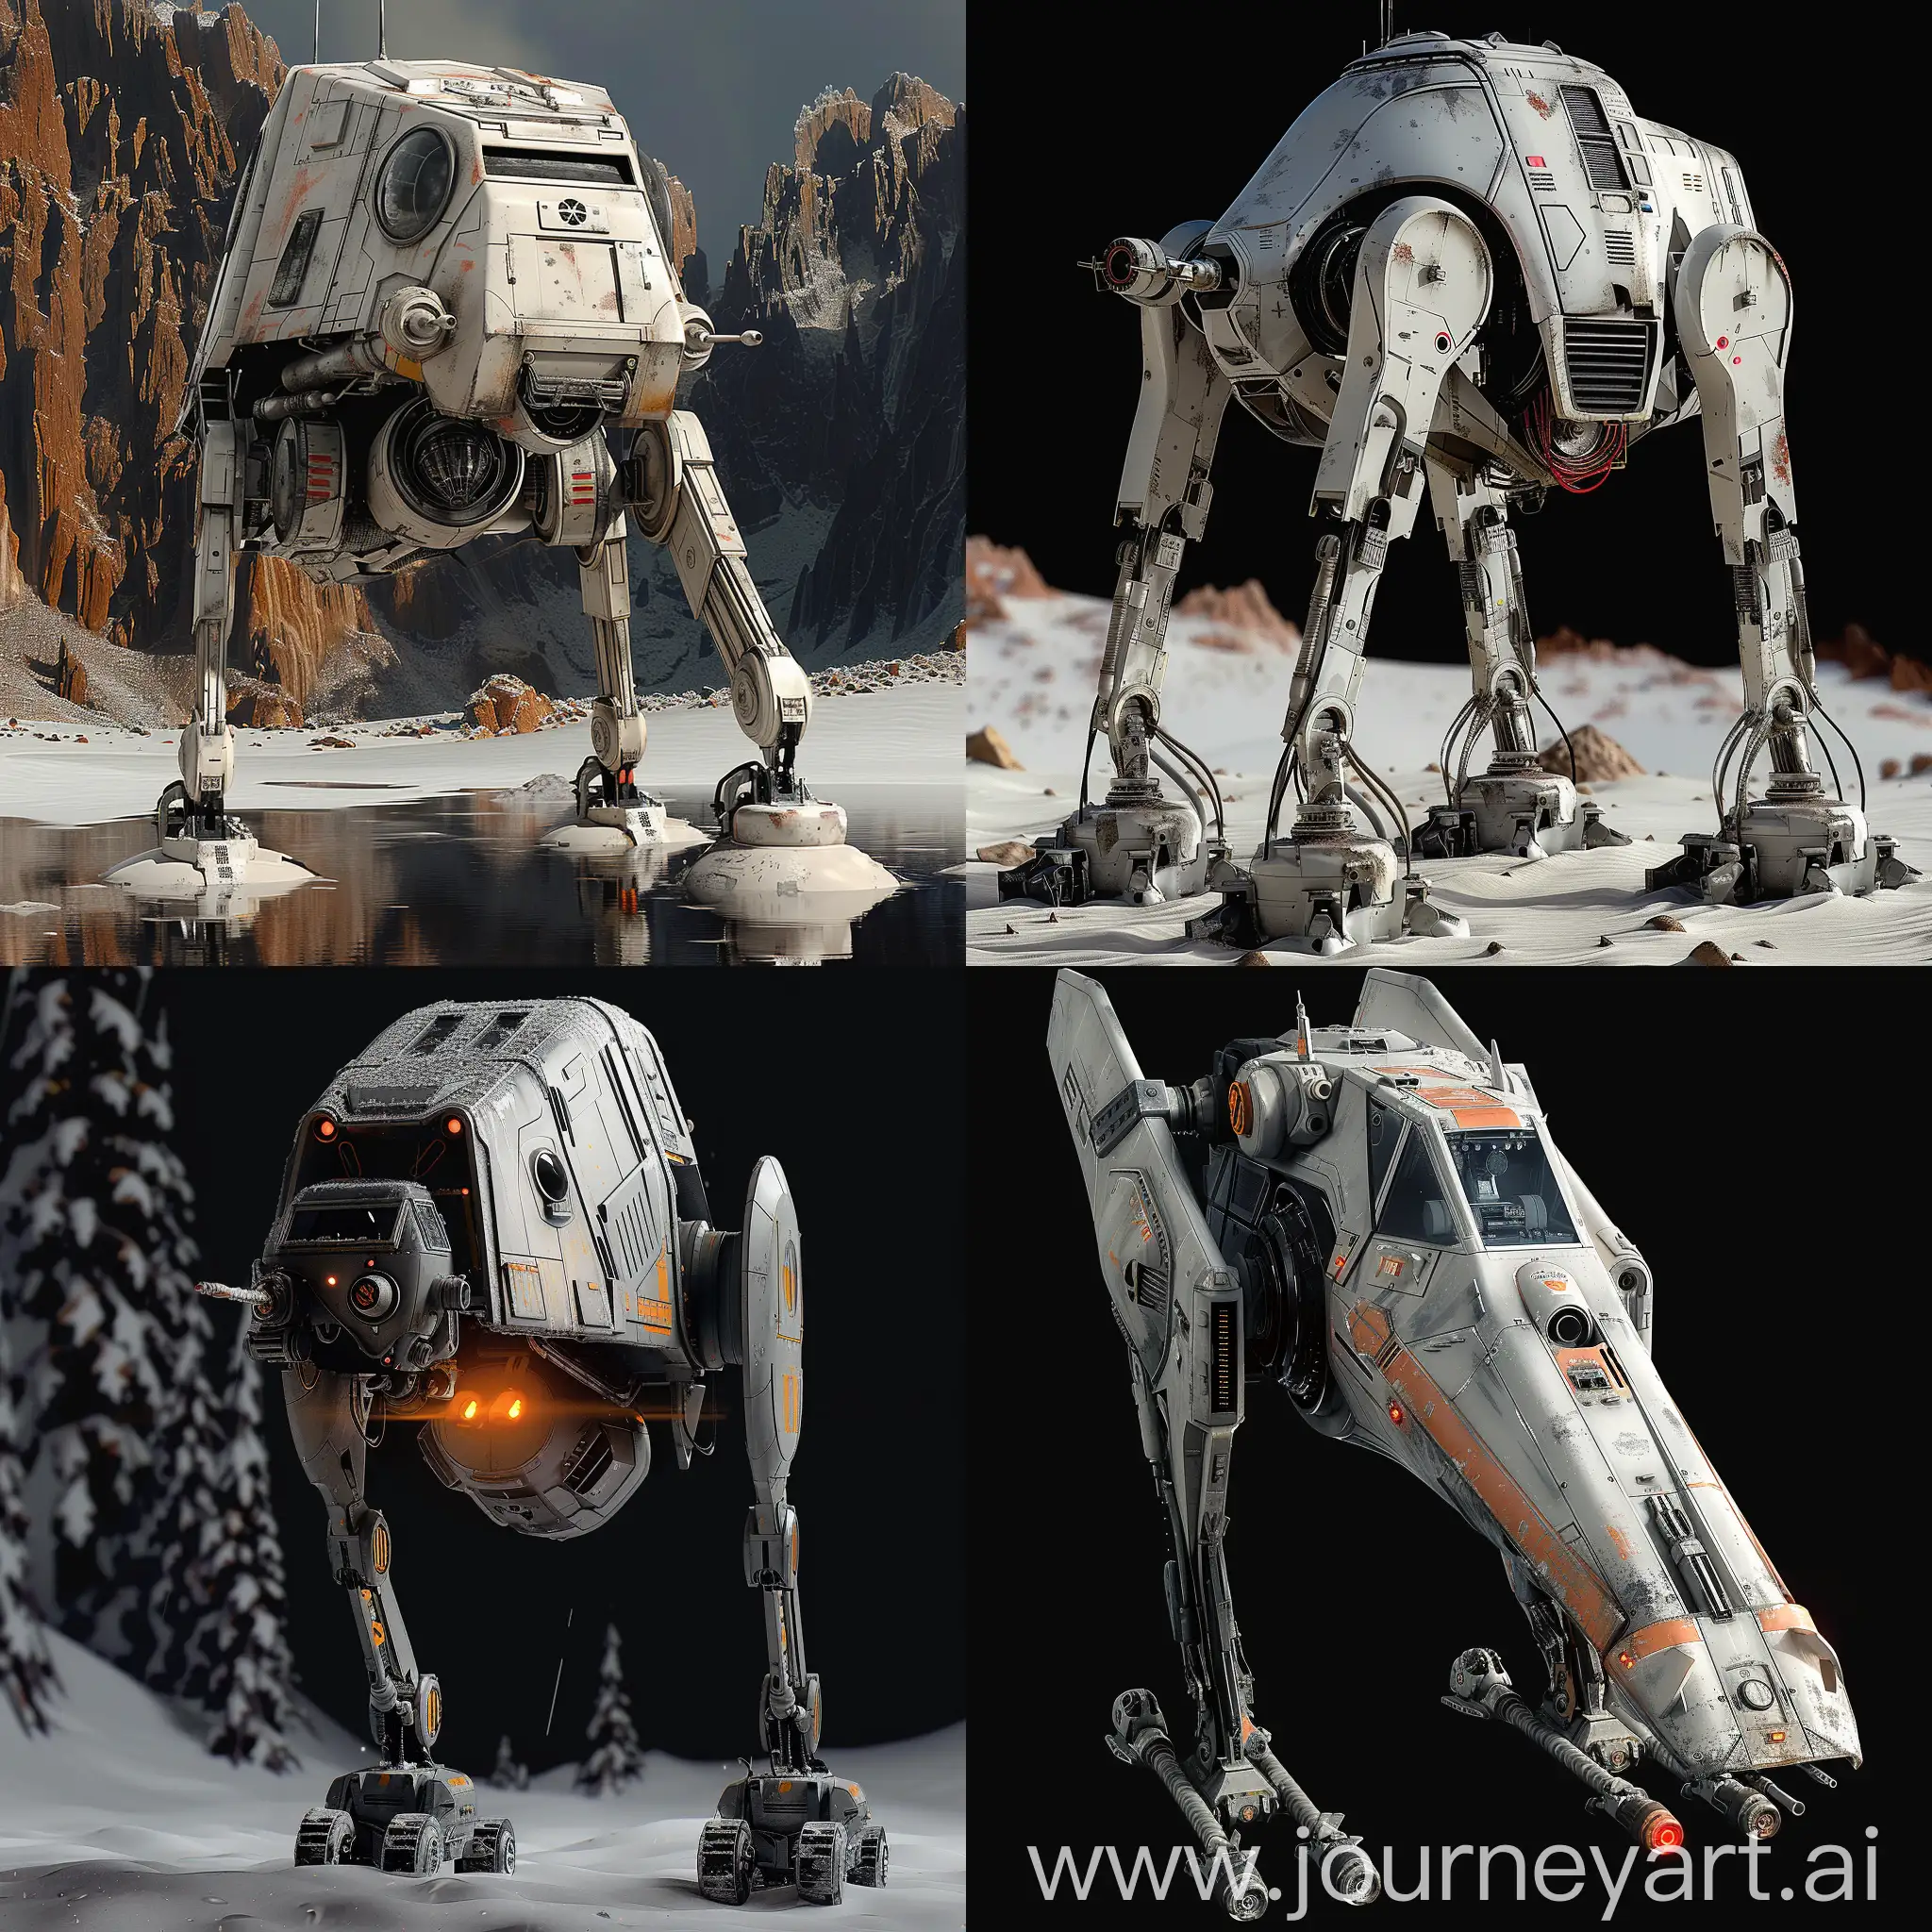 Futuristic:: Star Wars All Terrain Scout Transport https://static.wikia.nocookie.net/starwars/images/f/ff/ATST-SWBdice.png/revision/latest?cb=20230723050455, Advanced AI Navigation System, Holographic Heads-Up Display (HUD), Energy Shielding Technology, Stealth Mode, Hyperdrive Capability, Adaptive Camouflage, Drone Deployment System, Neural Interface Control, Advanced Sensor Suite, Self-Repairing Nanotech Armor, Self-Healing Armor, Nanoscale Weapon Systems, Nanomedical Bay, Nanoscale Cloaking Technology, Nanoscale Communication Network, Nanoscale Energy Efficiency, Nanoscale Environmental Adaptation, Nanoscale Sensor Enhancement, Nanoscale Repair Drones, Nanoscale Defense Grid, octane render --stylize 1000